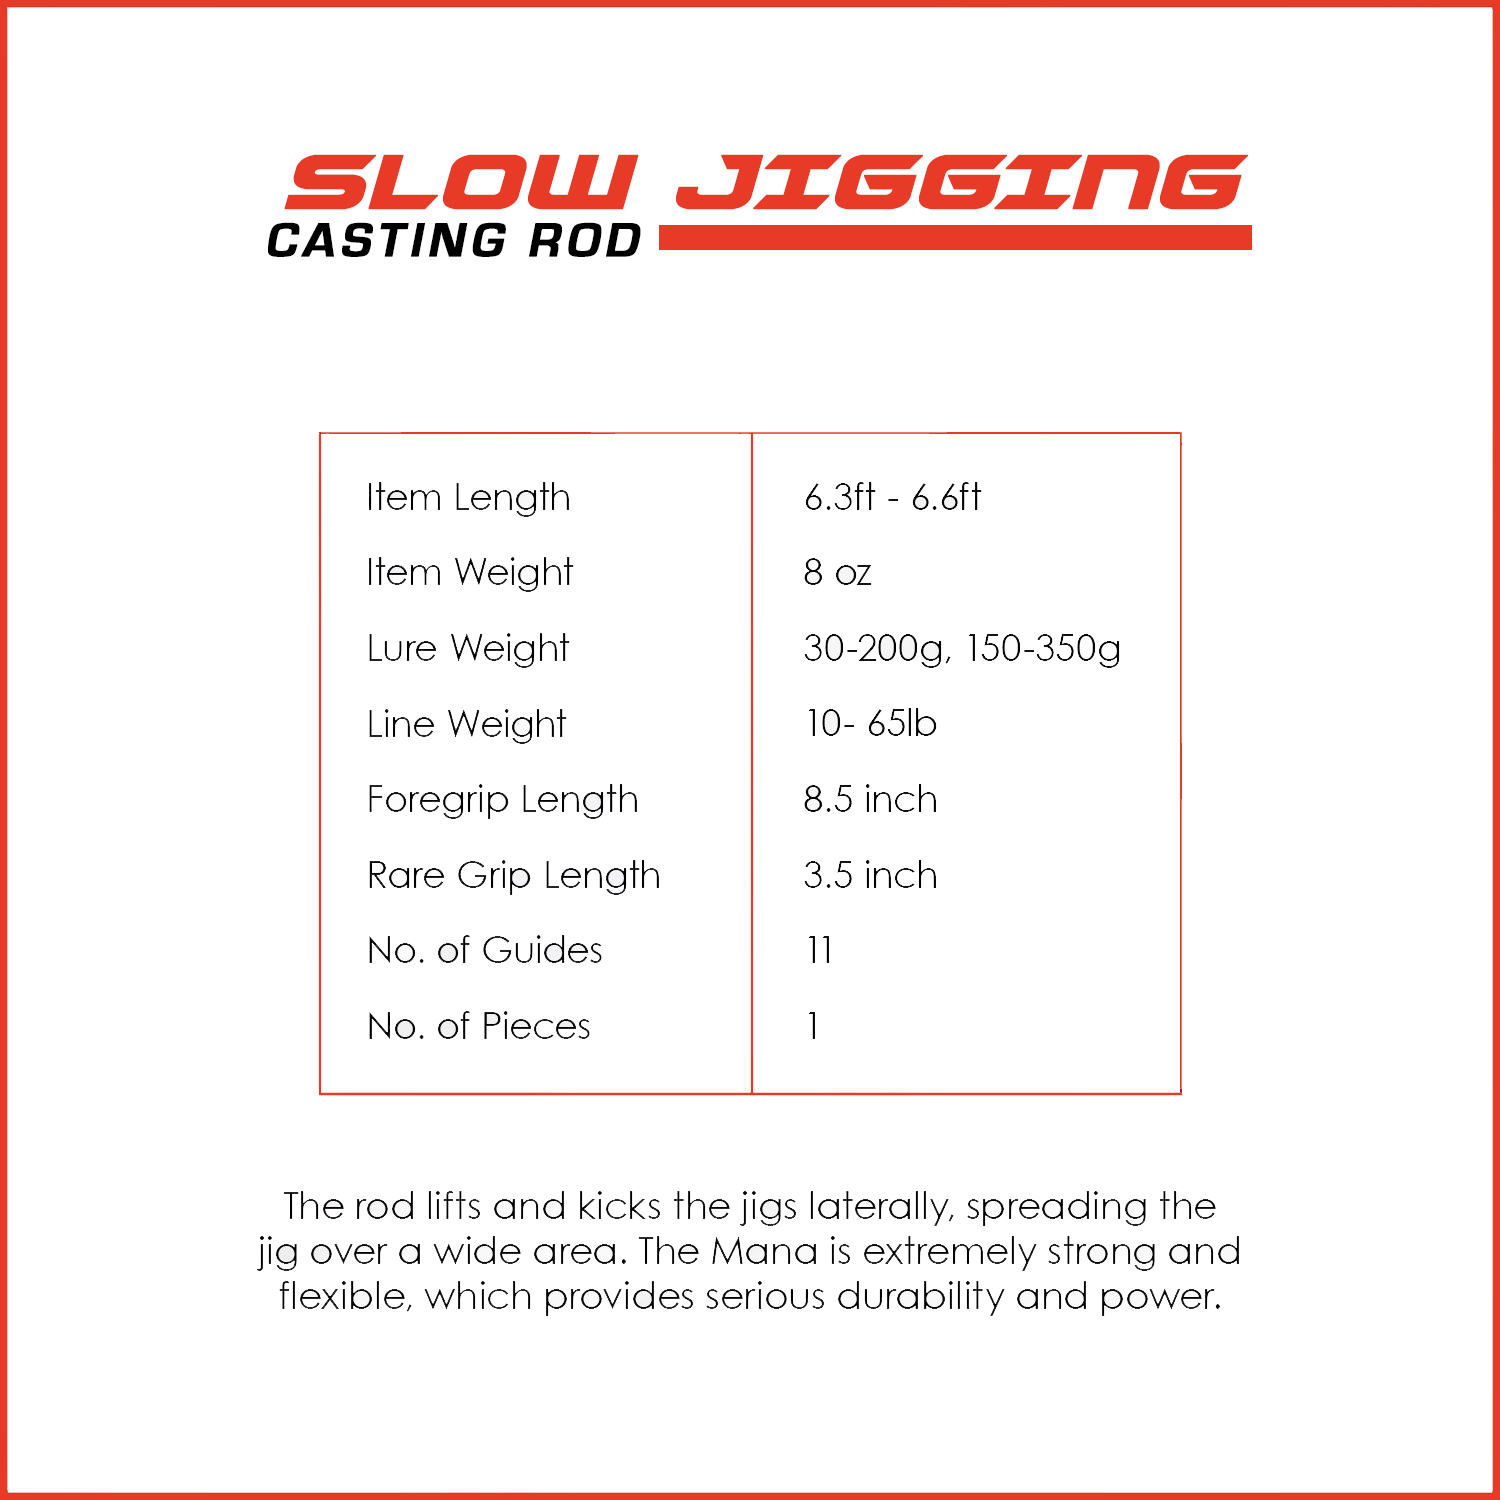 The rod lifts and kicks the jigs laterally, spreading the jig over a wide area. The Mana is extremely strong and flexible, which provides serious durability and power.